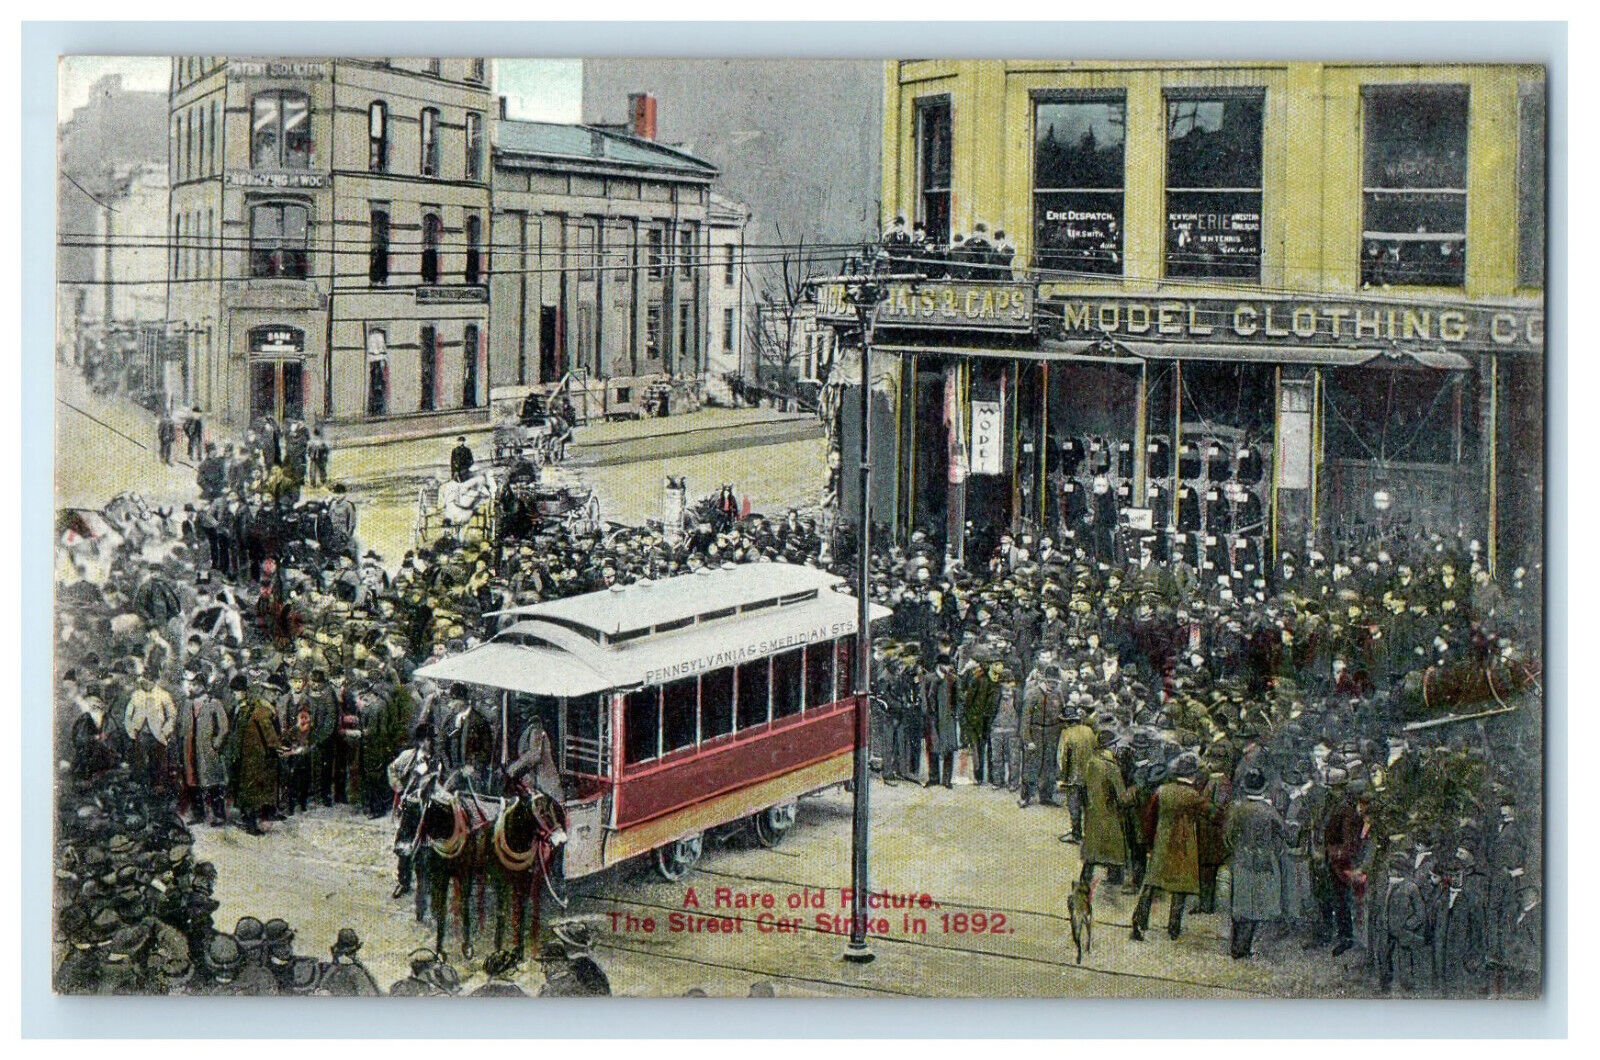 1892 Crowd Scene, Rare Old Picture Street Car Strike Indiana IN Antique Postcard